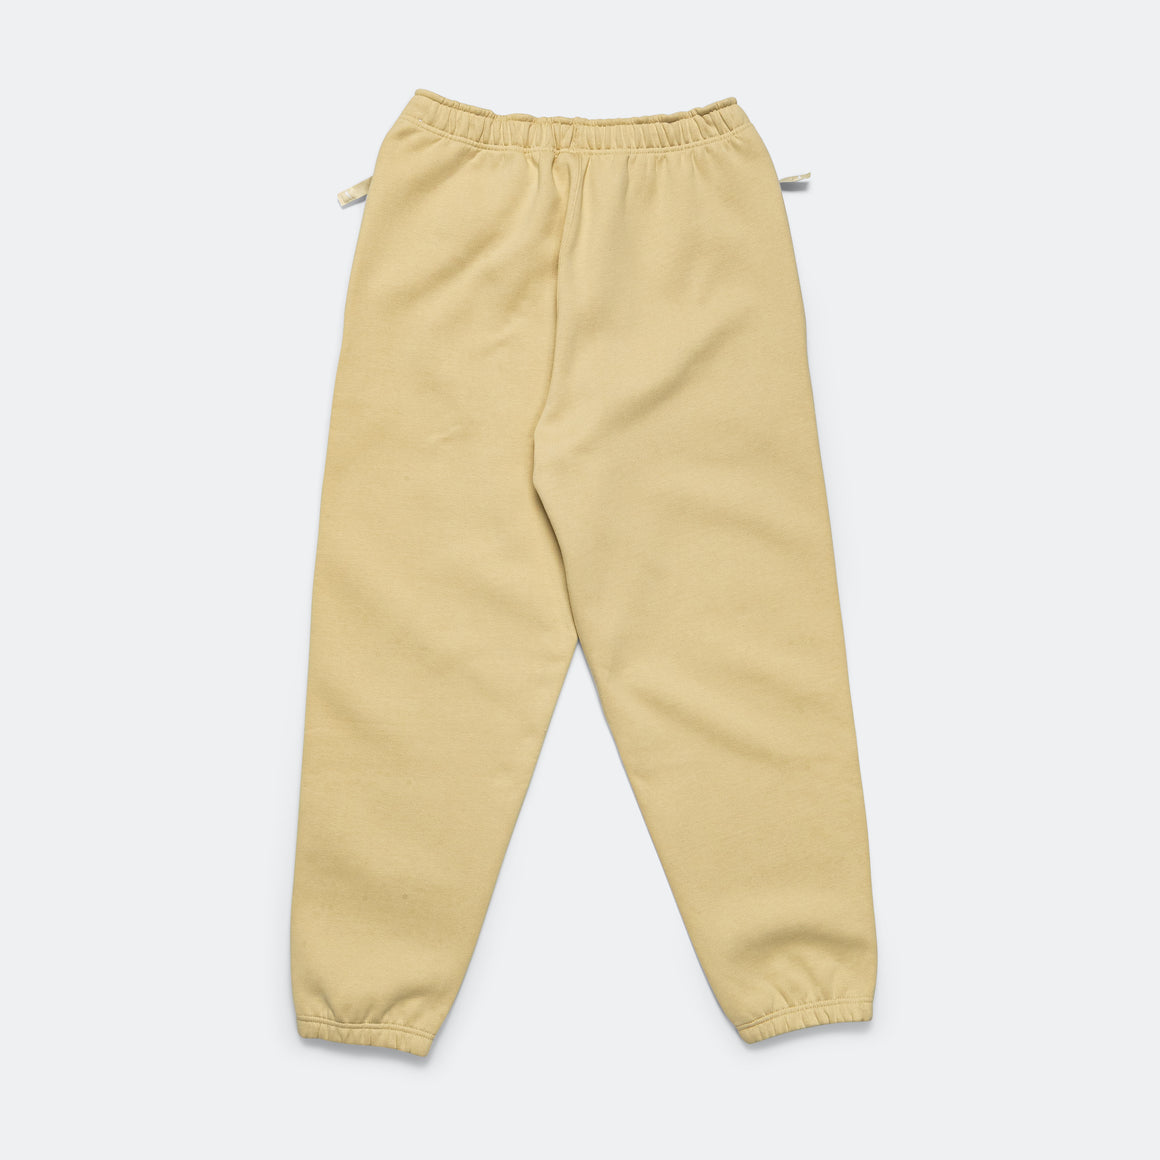 Nike - NikeLab NRG Solo Swoosh Fleece Pant - Team Gold/White - UP THERE